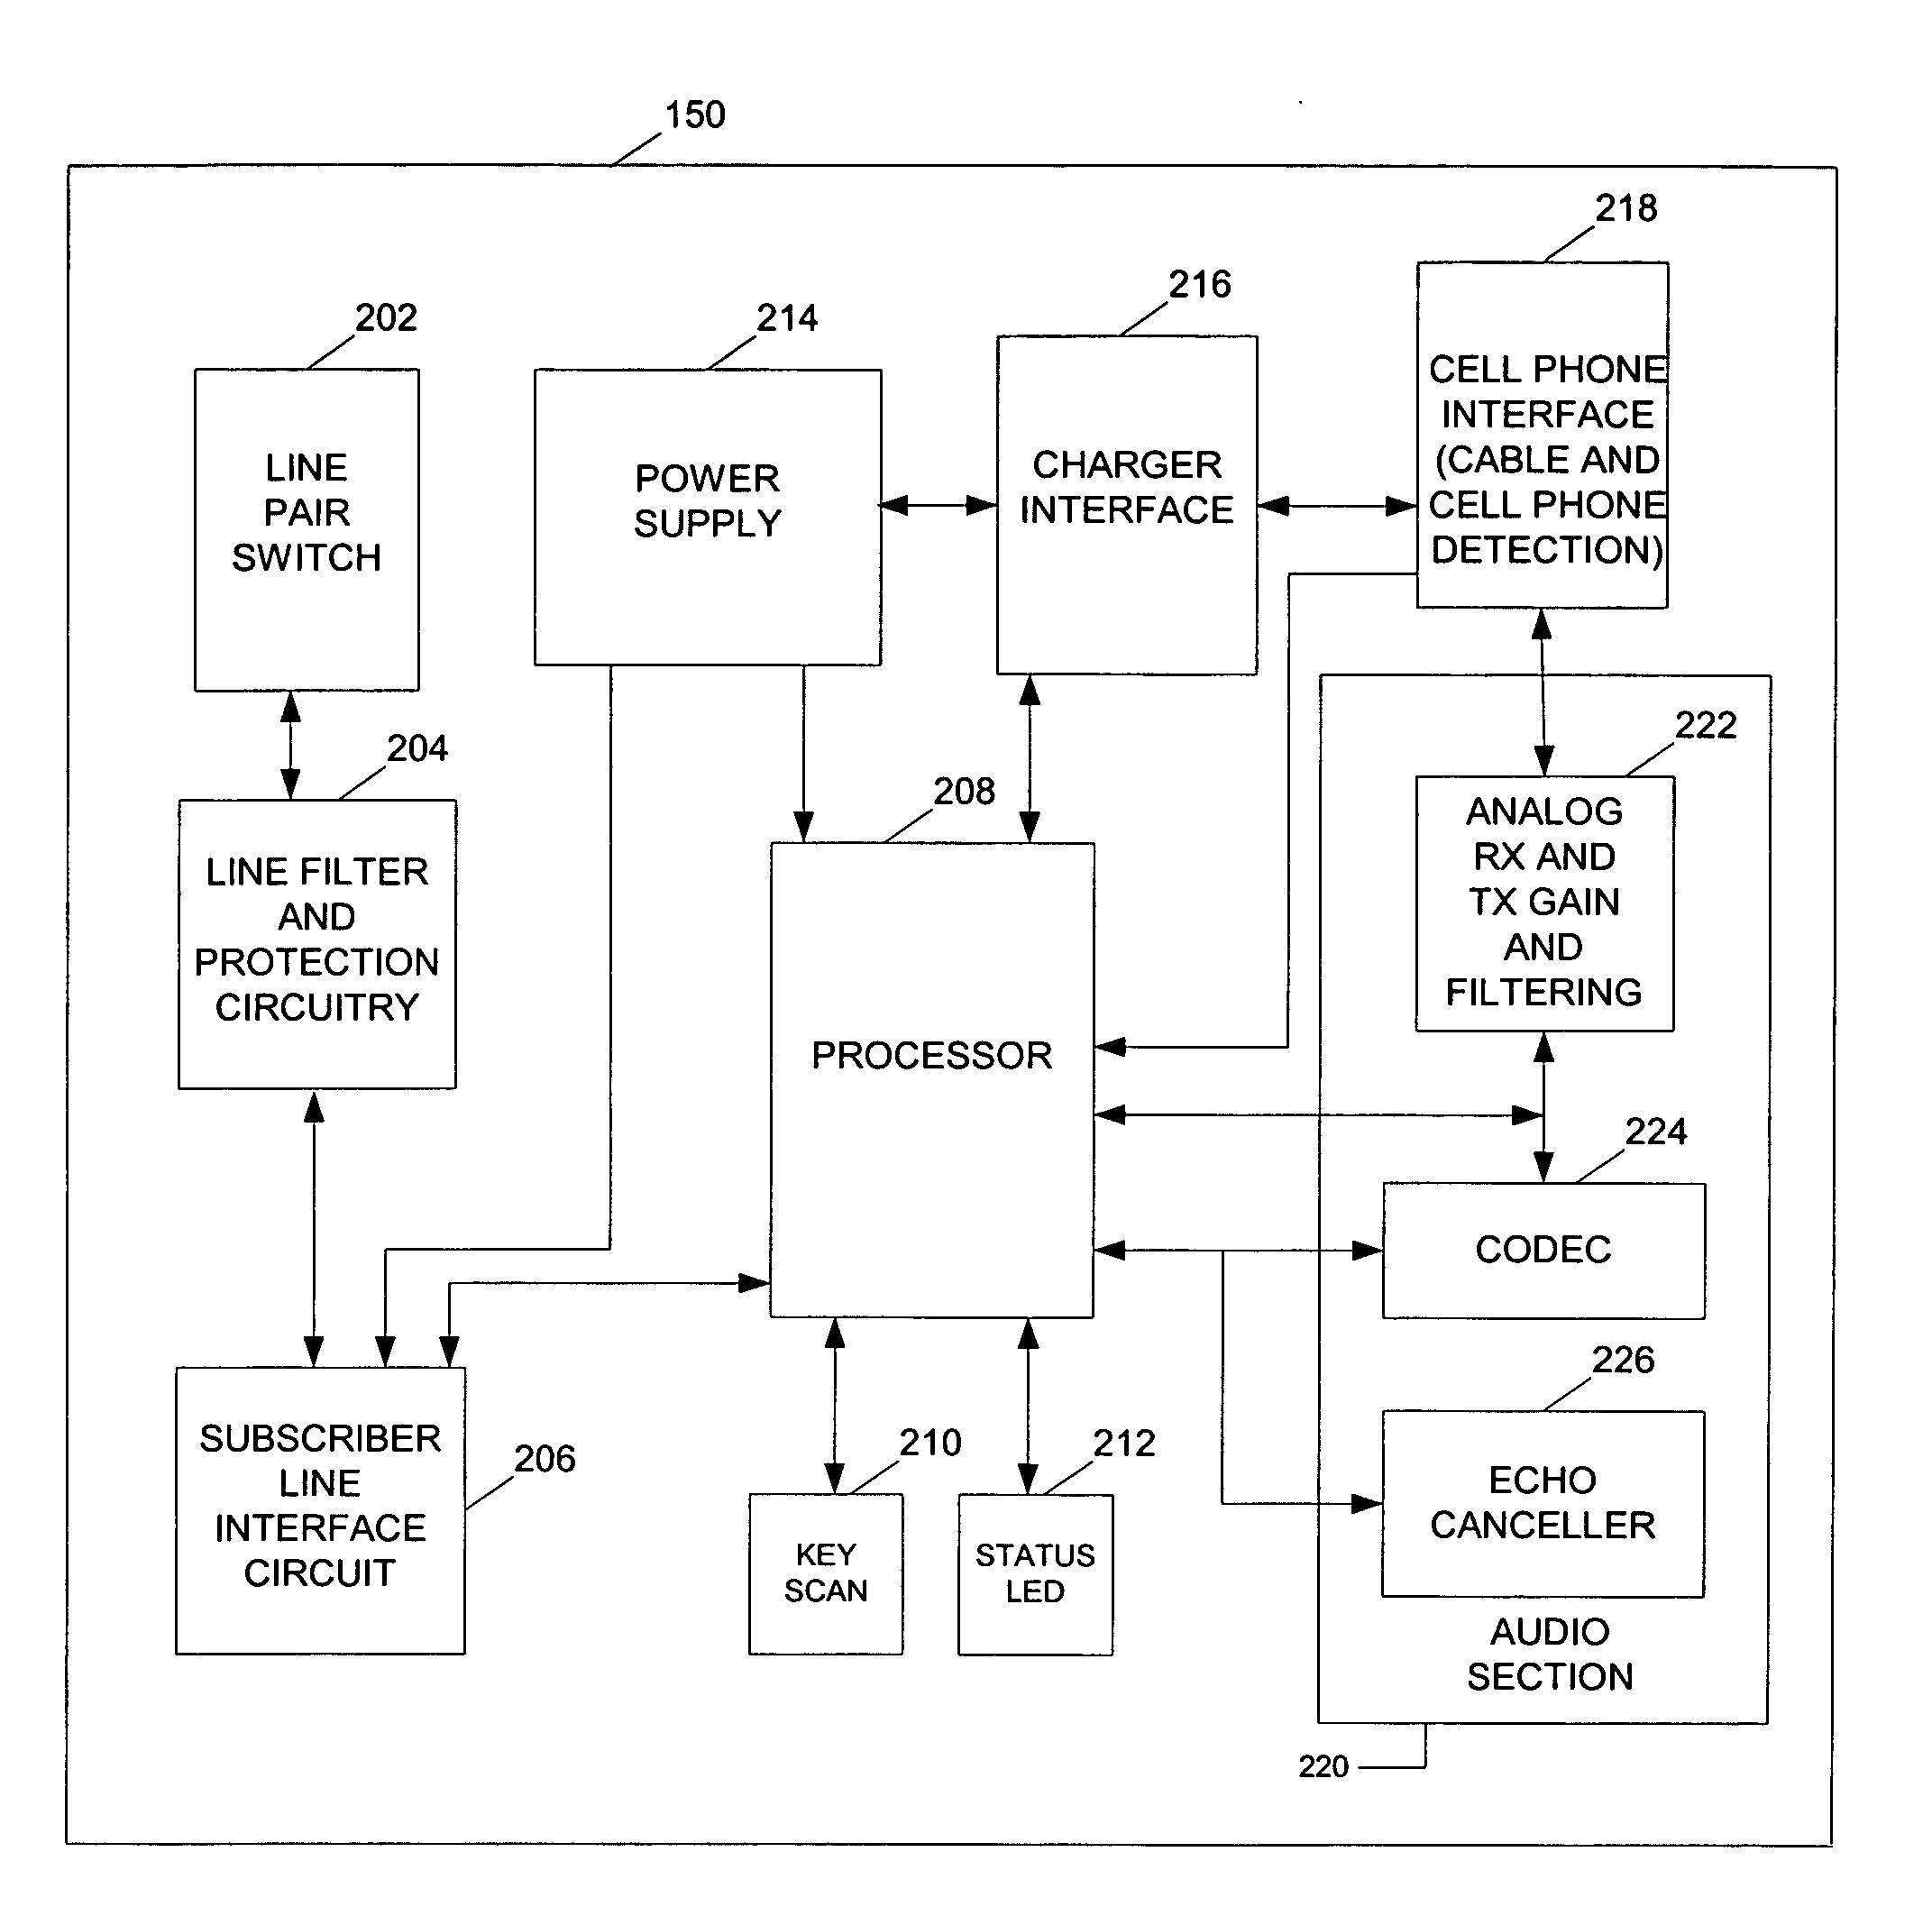 Telephone controller with intercom and paging functions and function for enabling landline telephones to send/receive calls via a mobile telephone